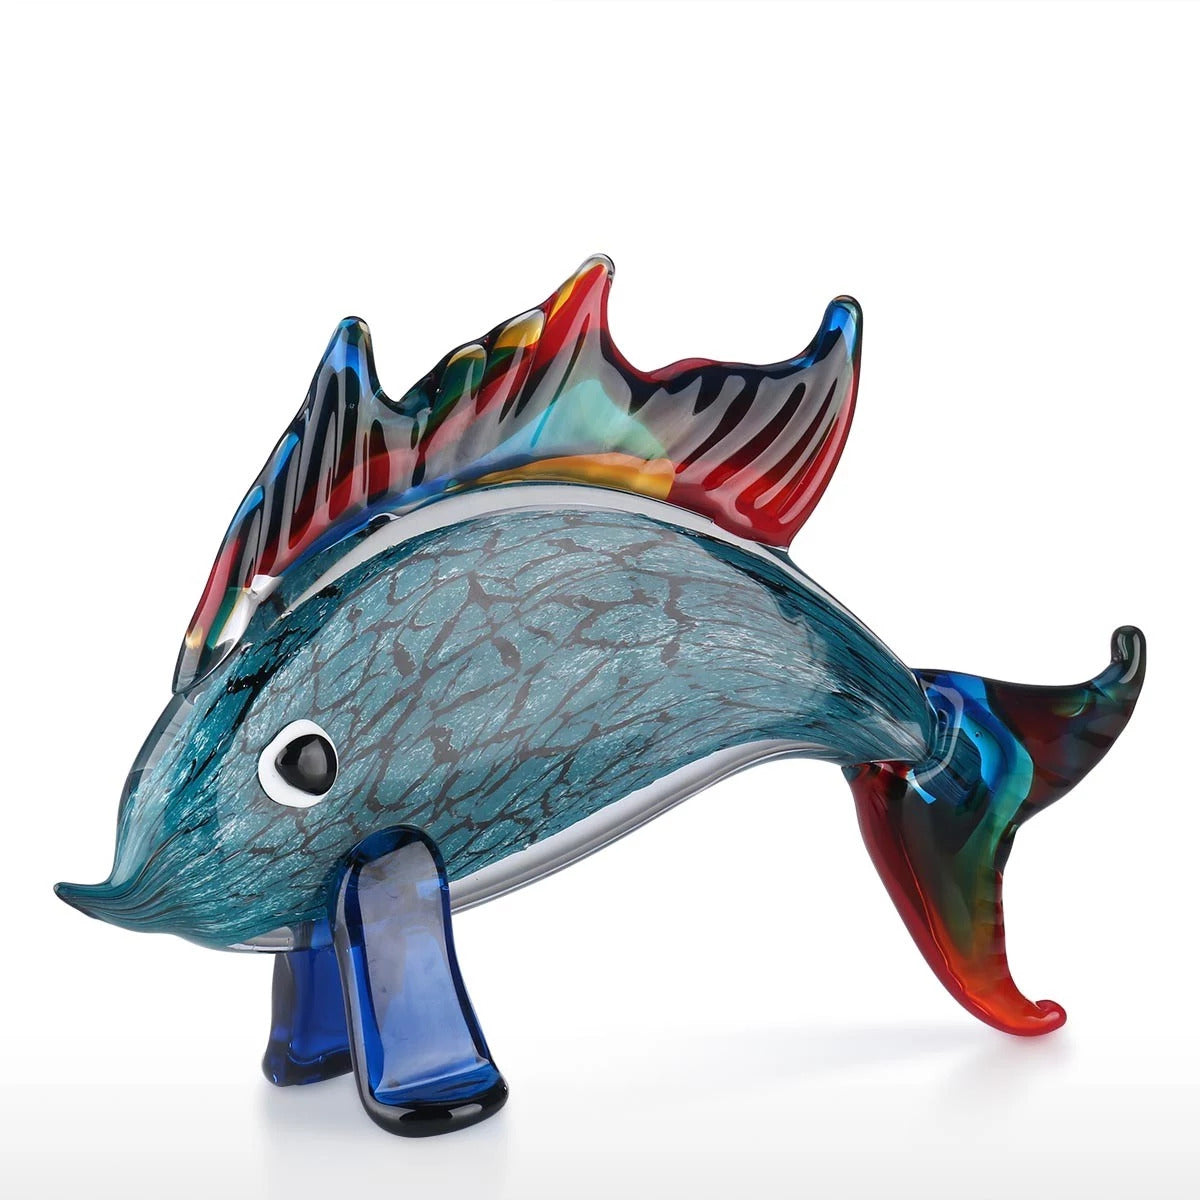 Aquarium Decor and Gifts with Dolphin Fish Glass Sculpture